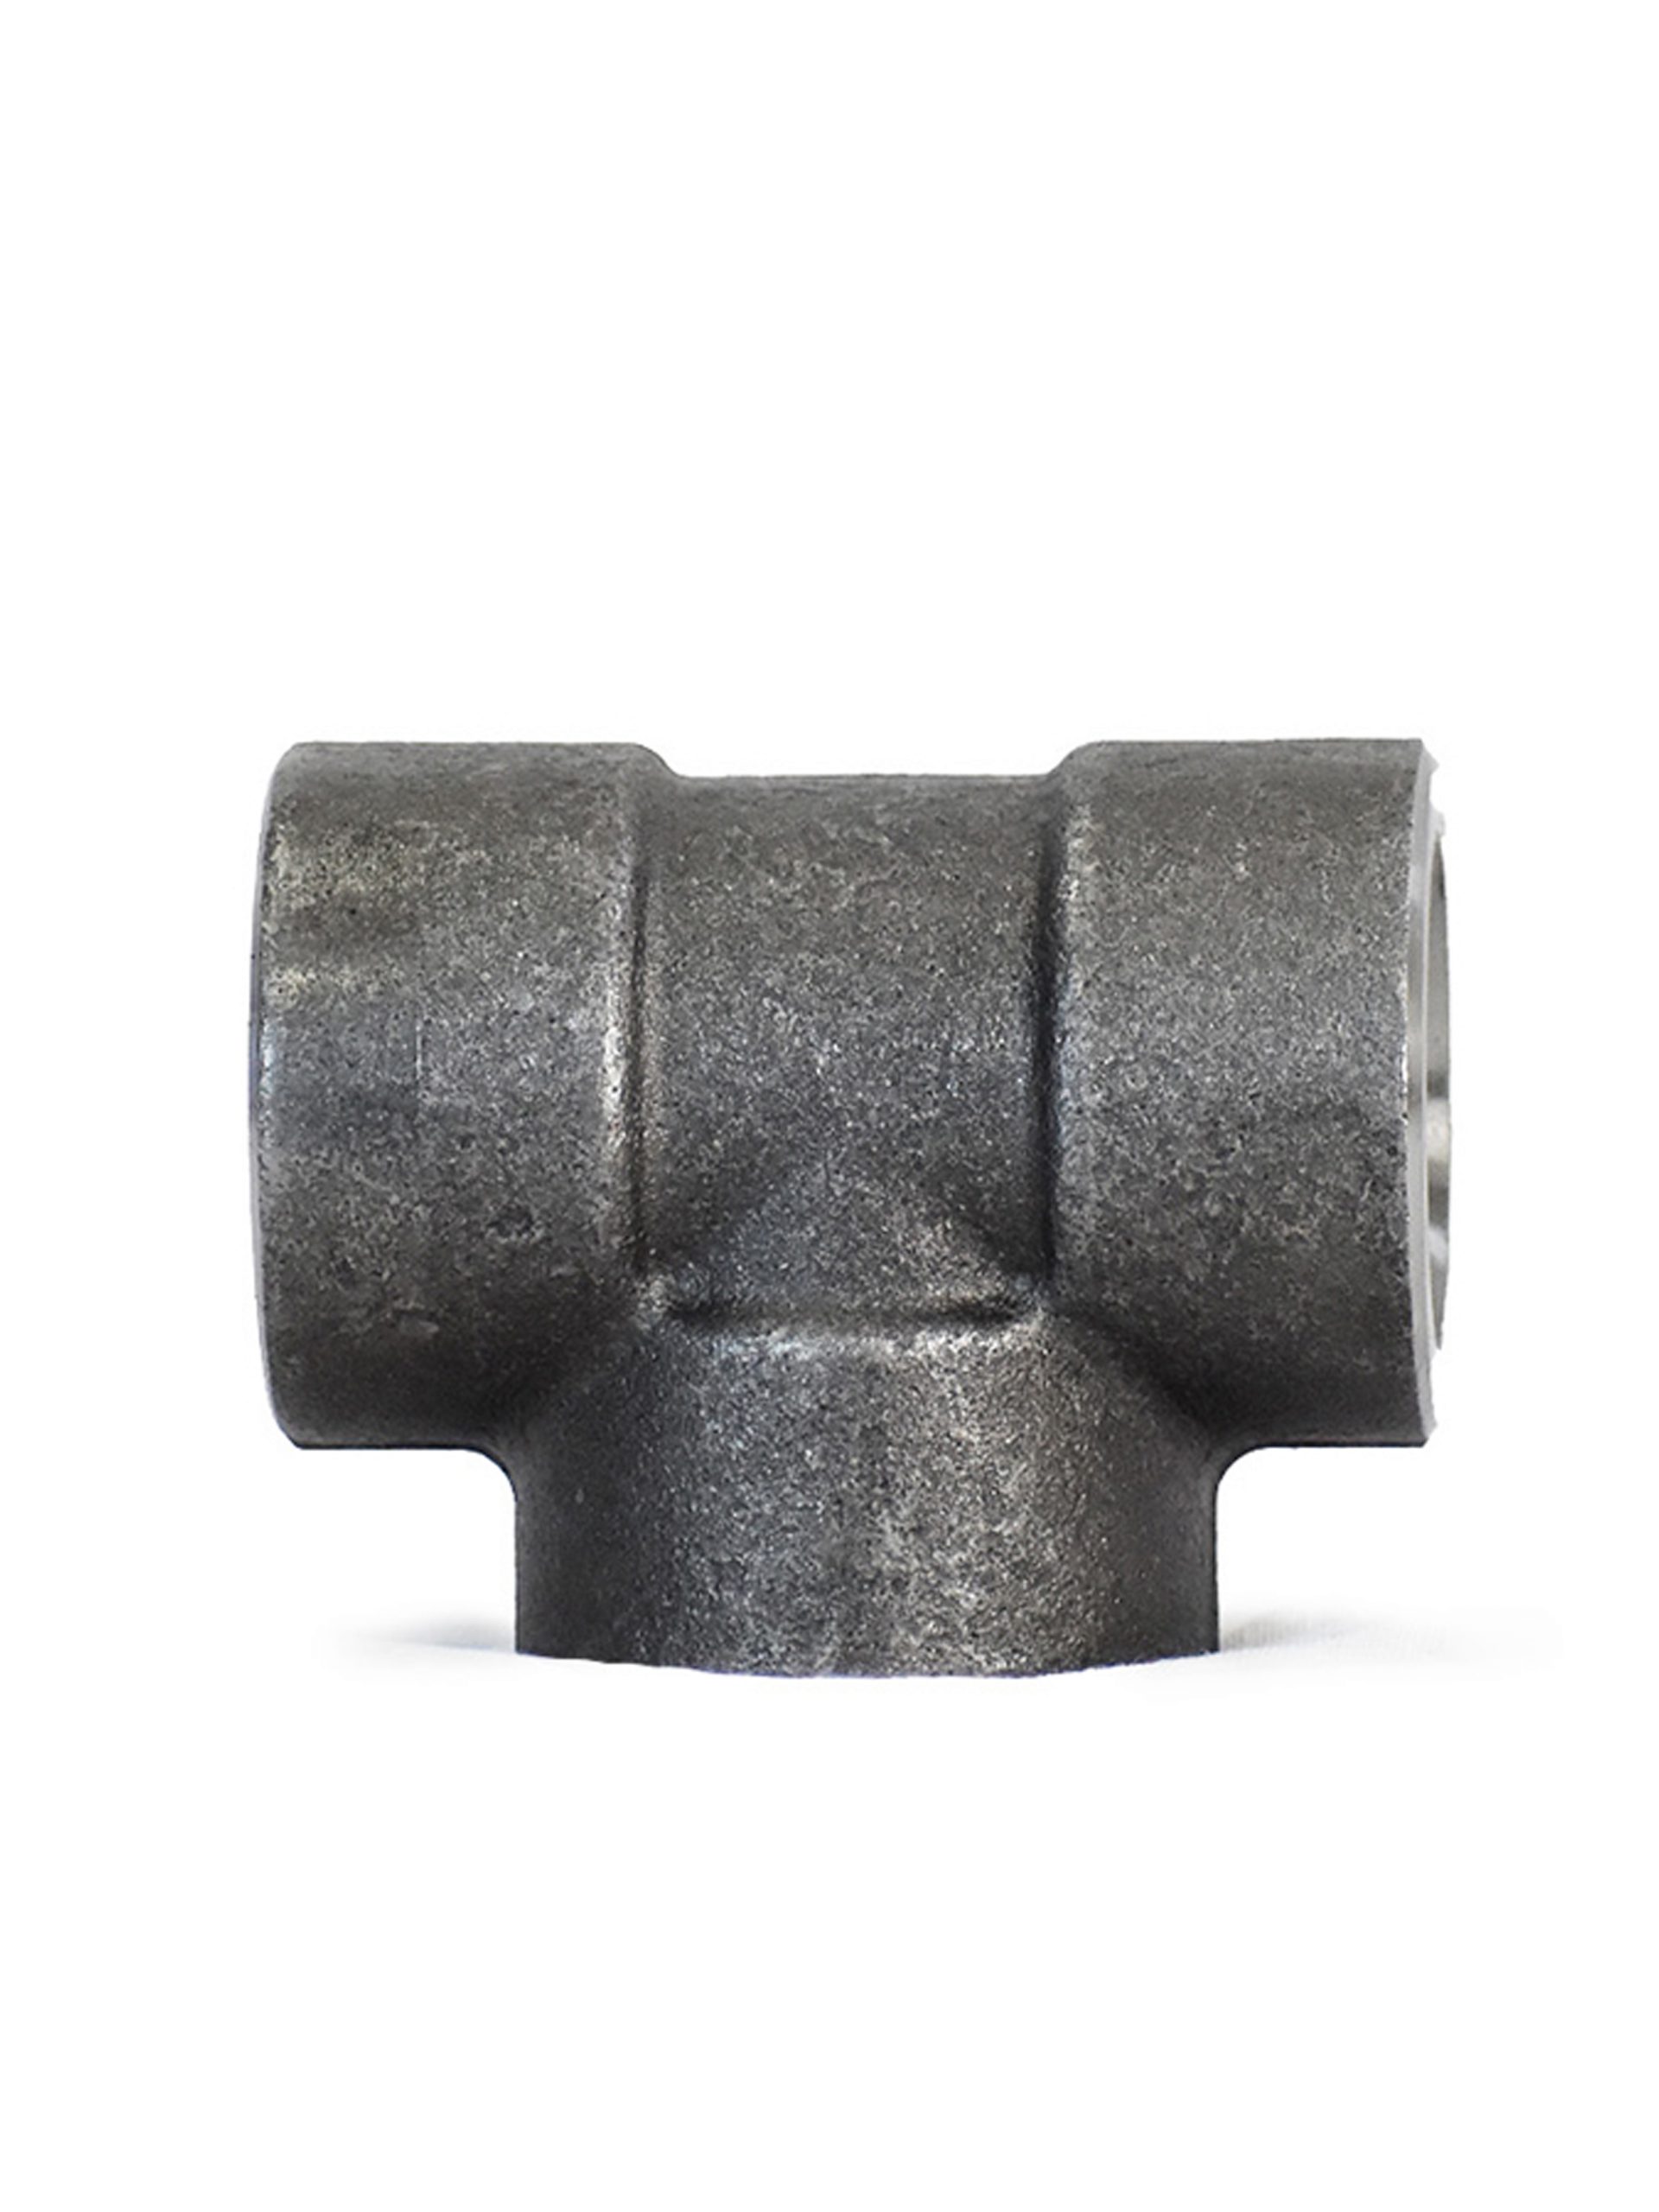 FORGED STEEL EQUAL TEE 1 Inches CLASS 2000 NPT from Gas Equipment Company Llc Abu Dhabi, UNITED ARAB EMIRATES